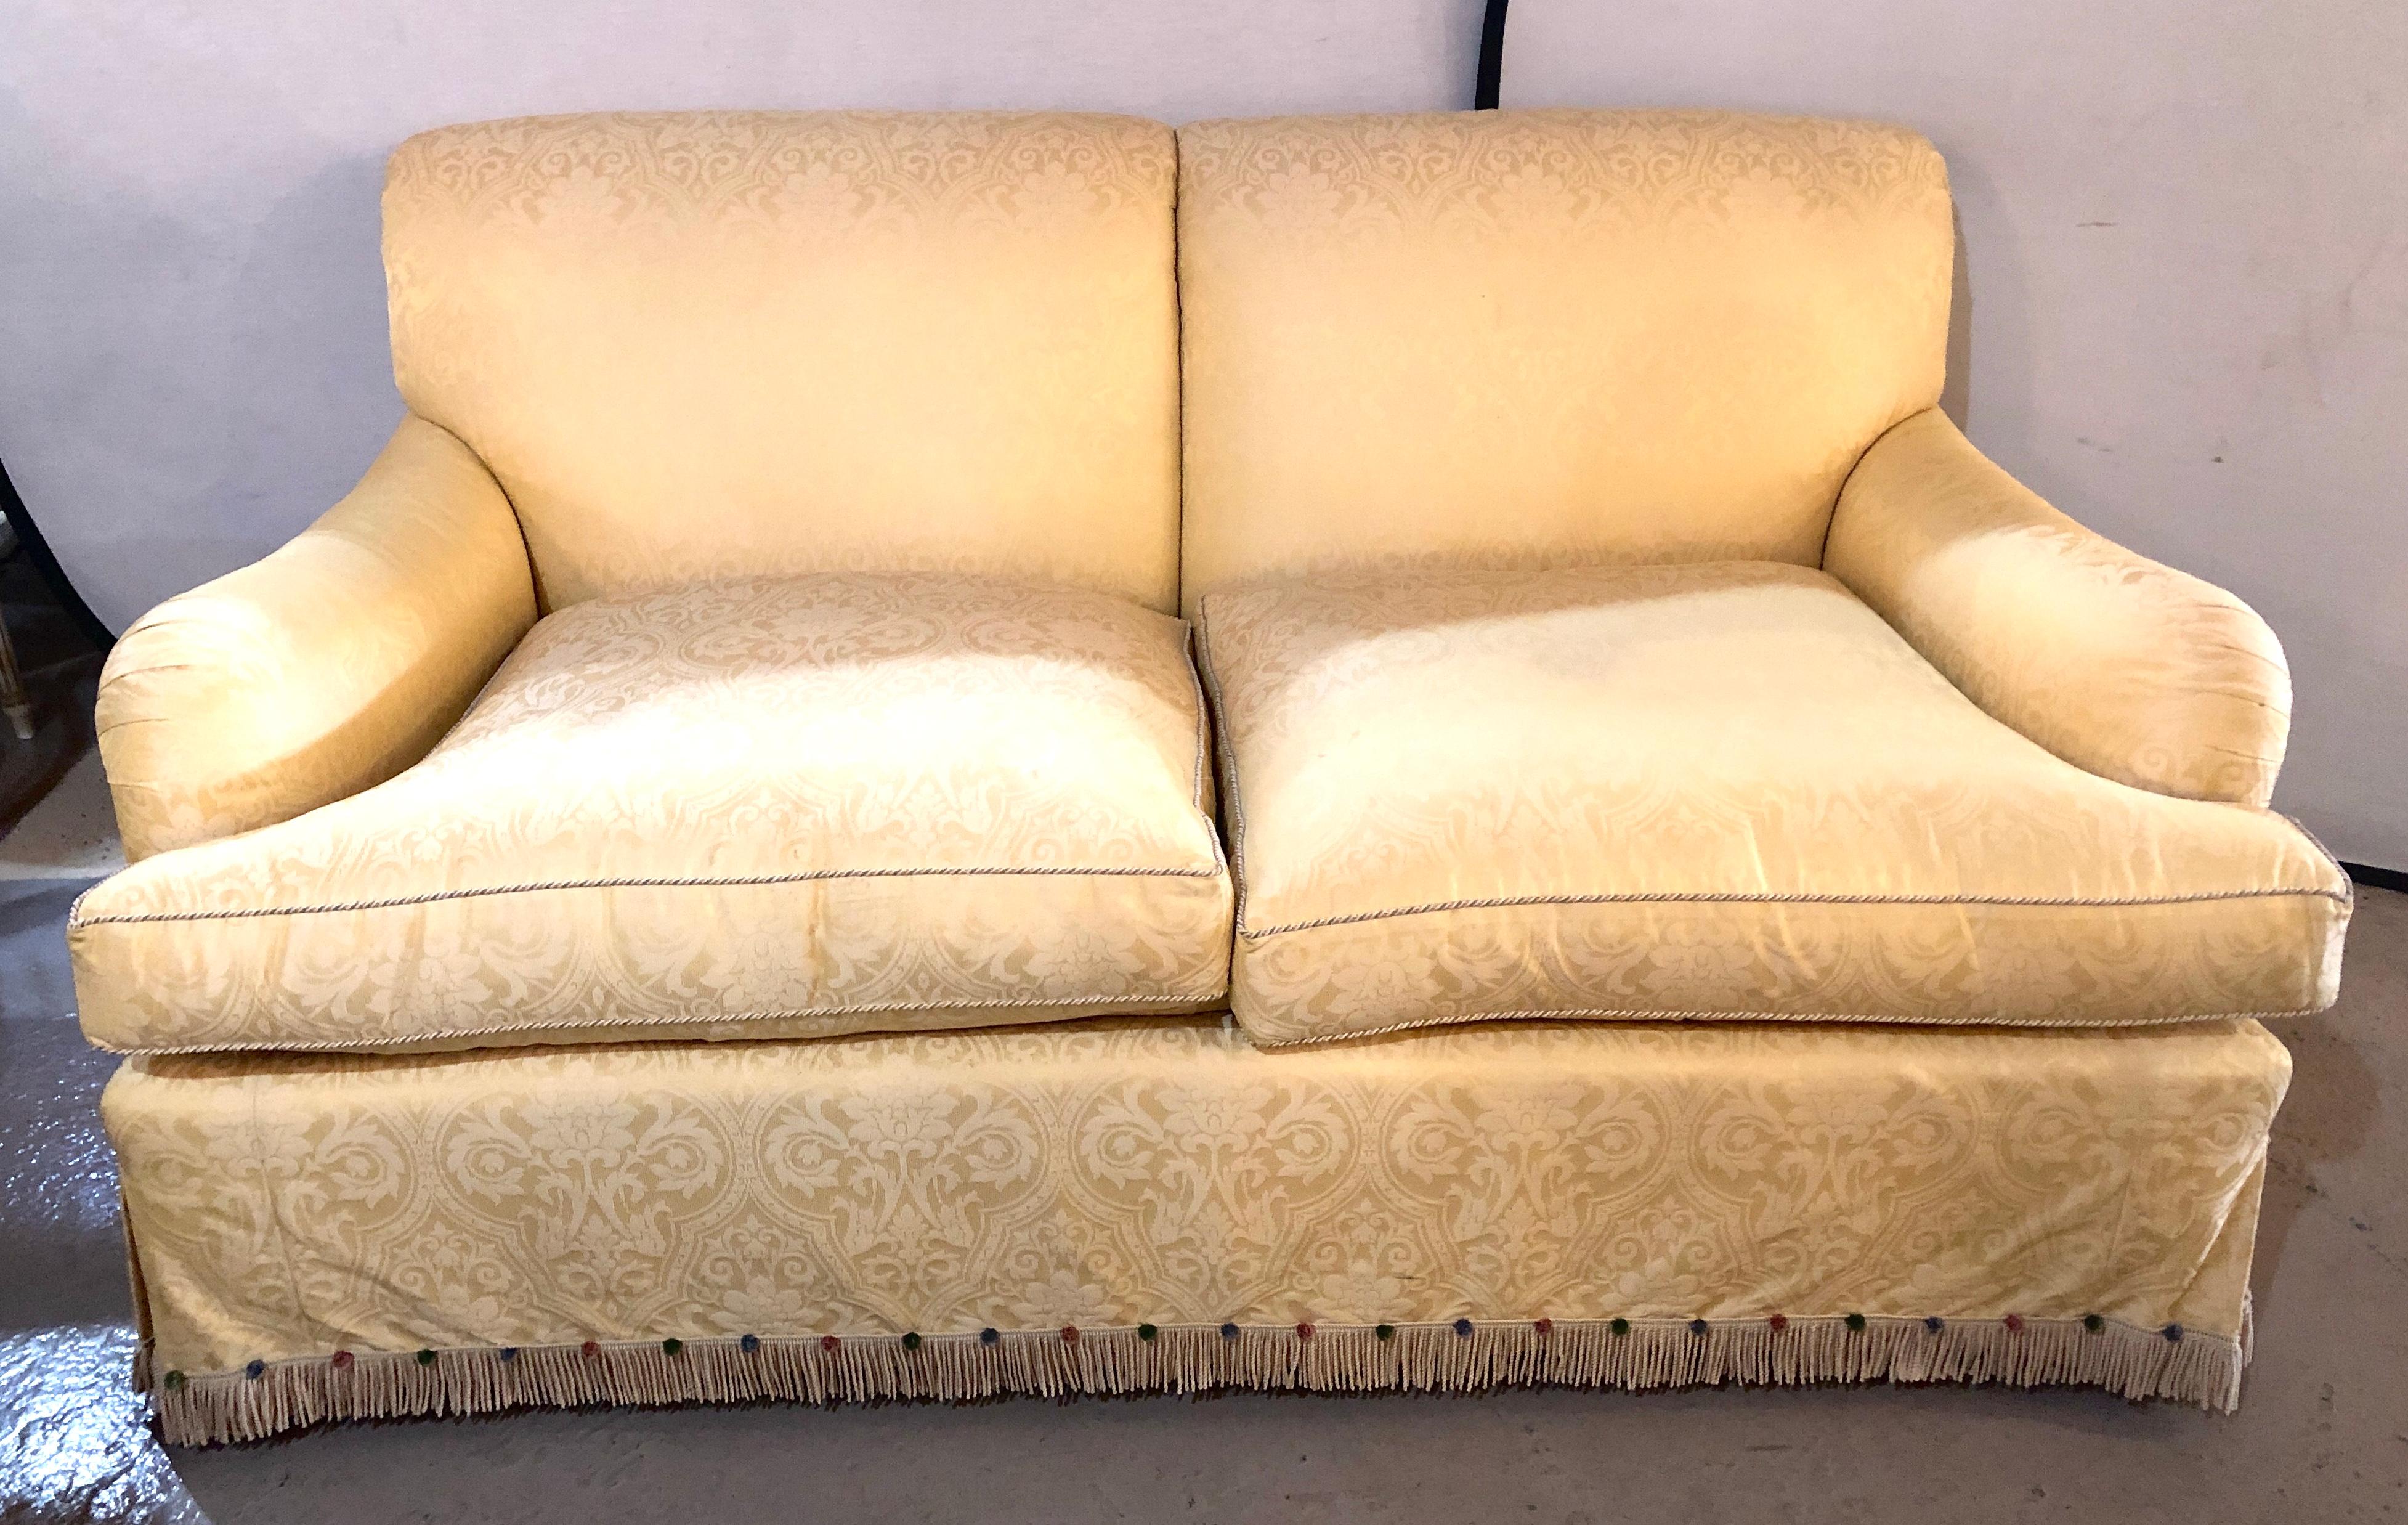 Large overstuffed settee in fantastic damask fully lined upholstery by O'Henry House ltd. Directly from a Mansion in Brownsville comes this fine very sleek and stylish settee in the most wonderful fabric.